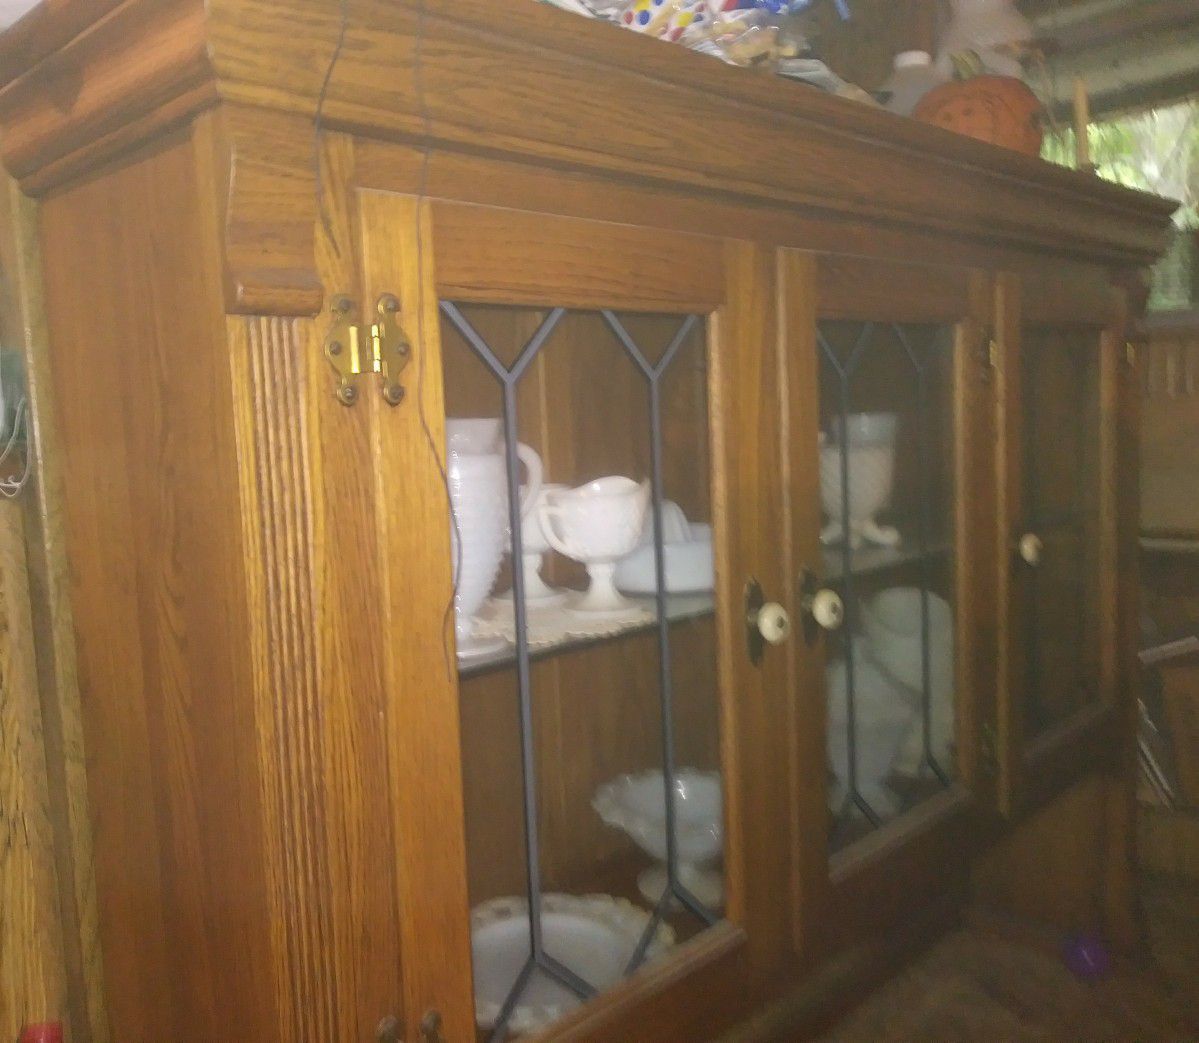 China cabinet (top)